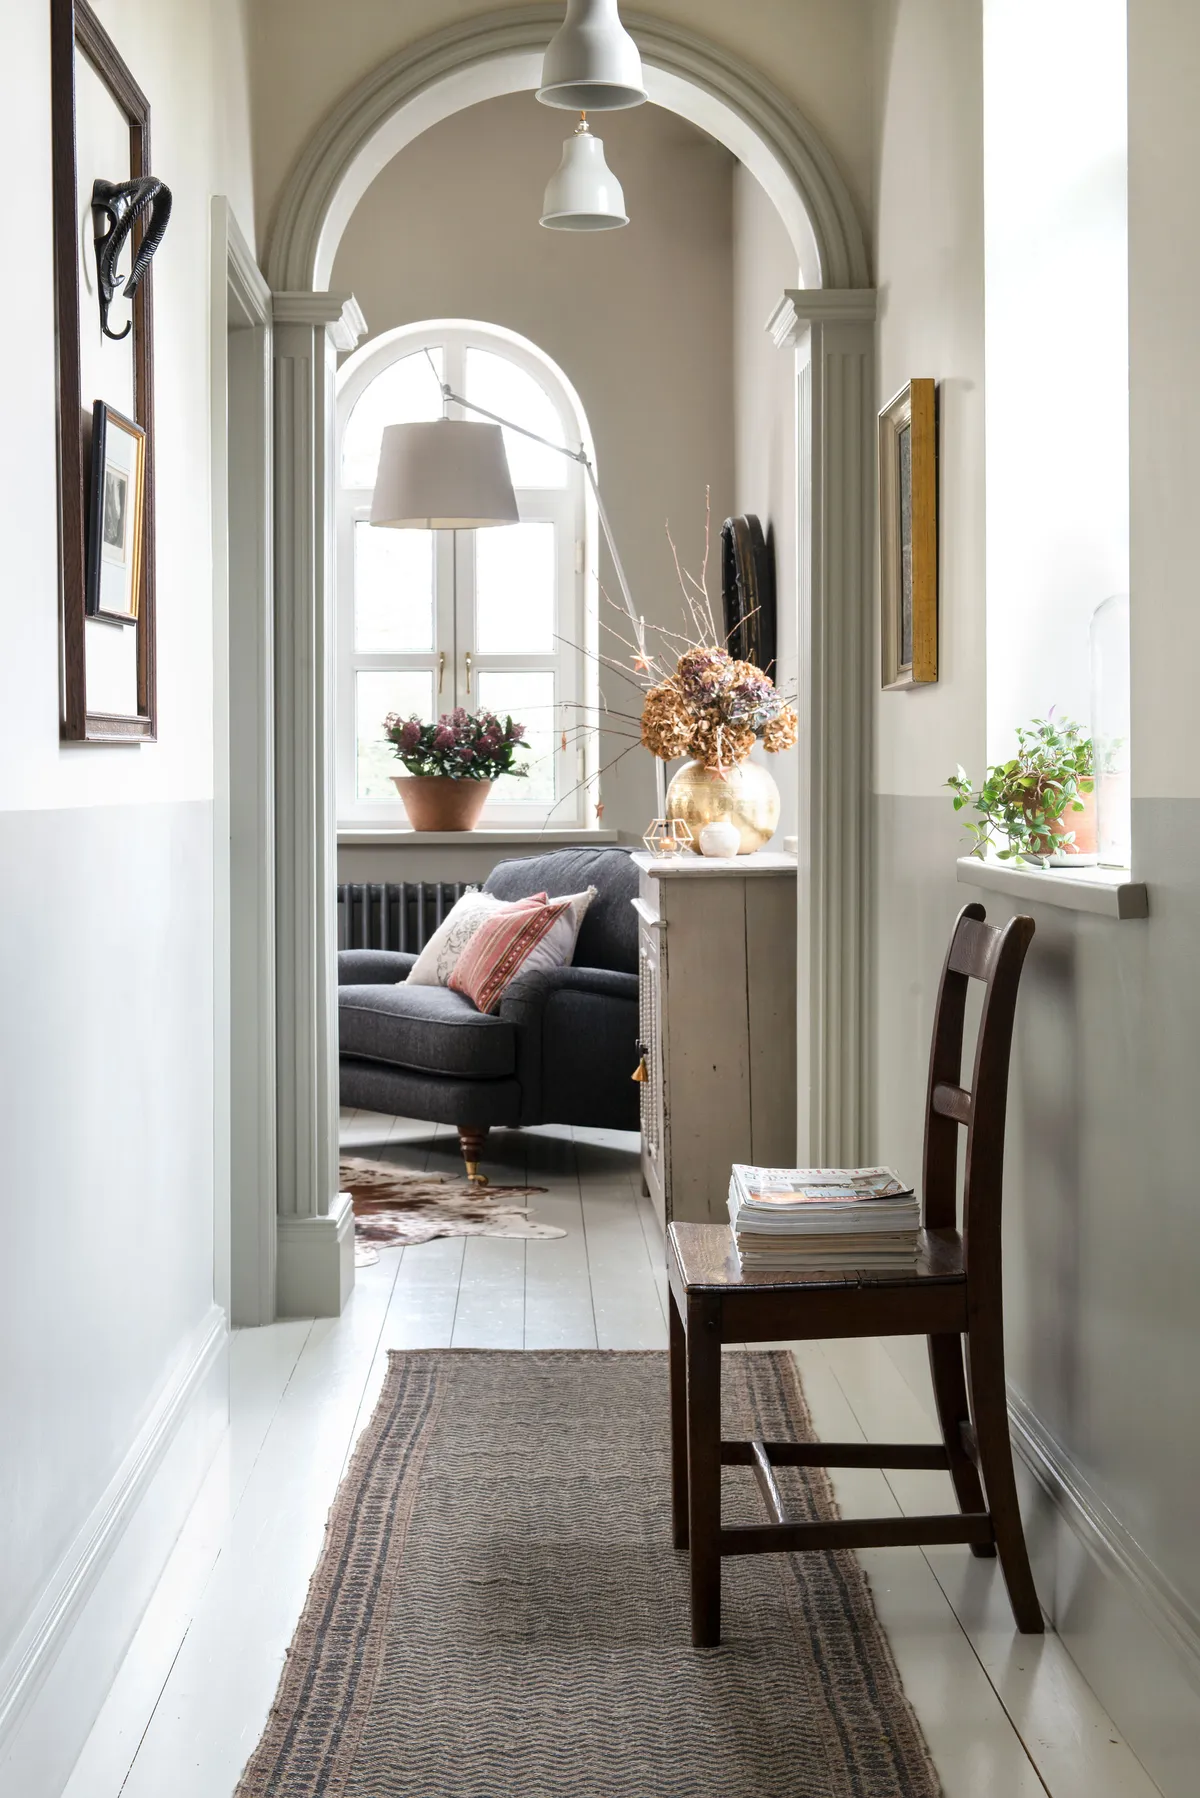 The chapel corridor was one of the features Kay loved the most. A row of pendant lights and framed art prints enhance the original detailing, and Kay painted half of the wall in a contrast shade for a faux panelled look